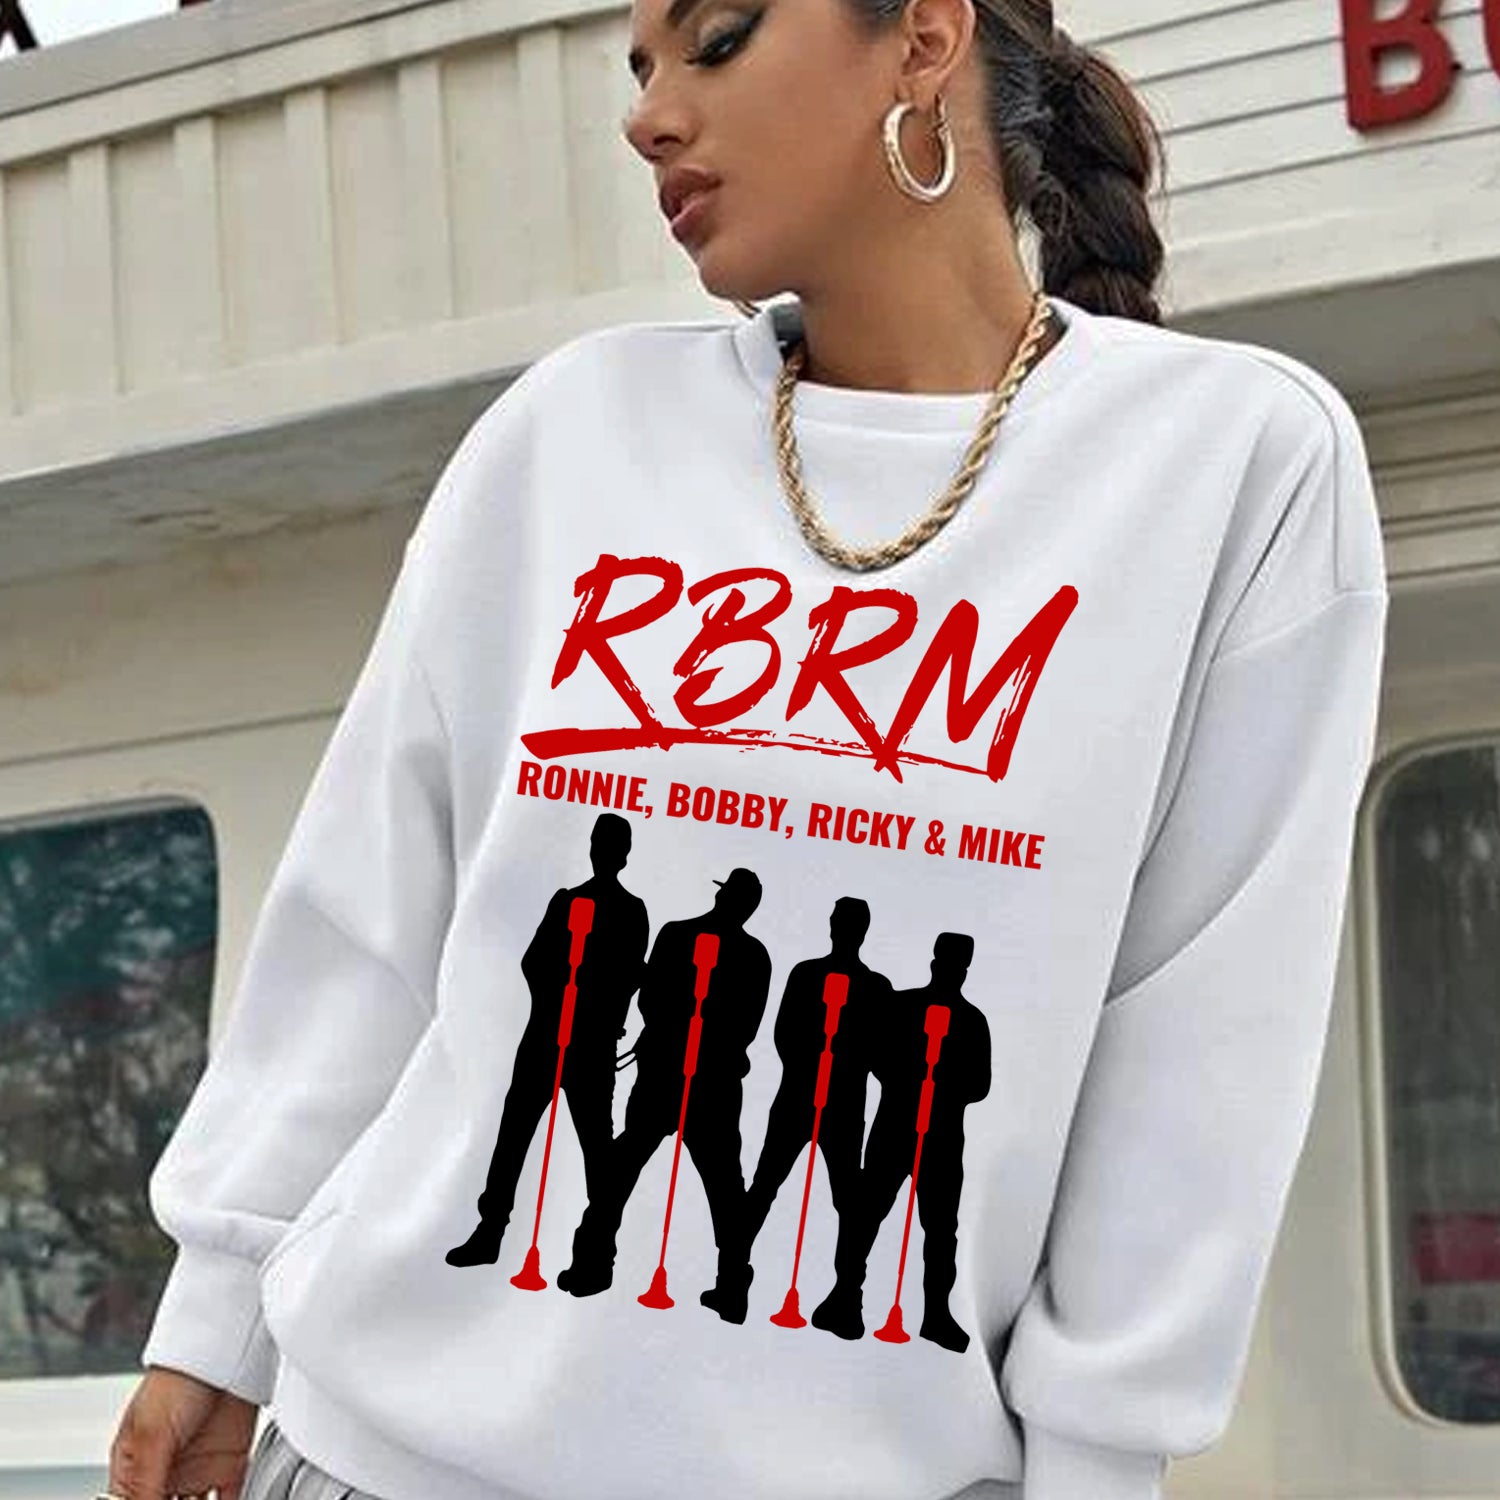 RBRM New Edition Sublimation Transfer